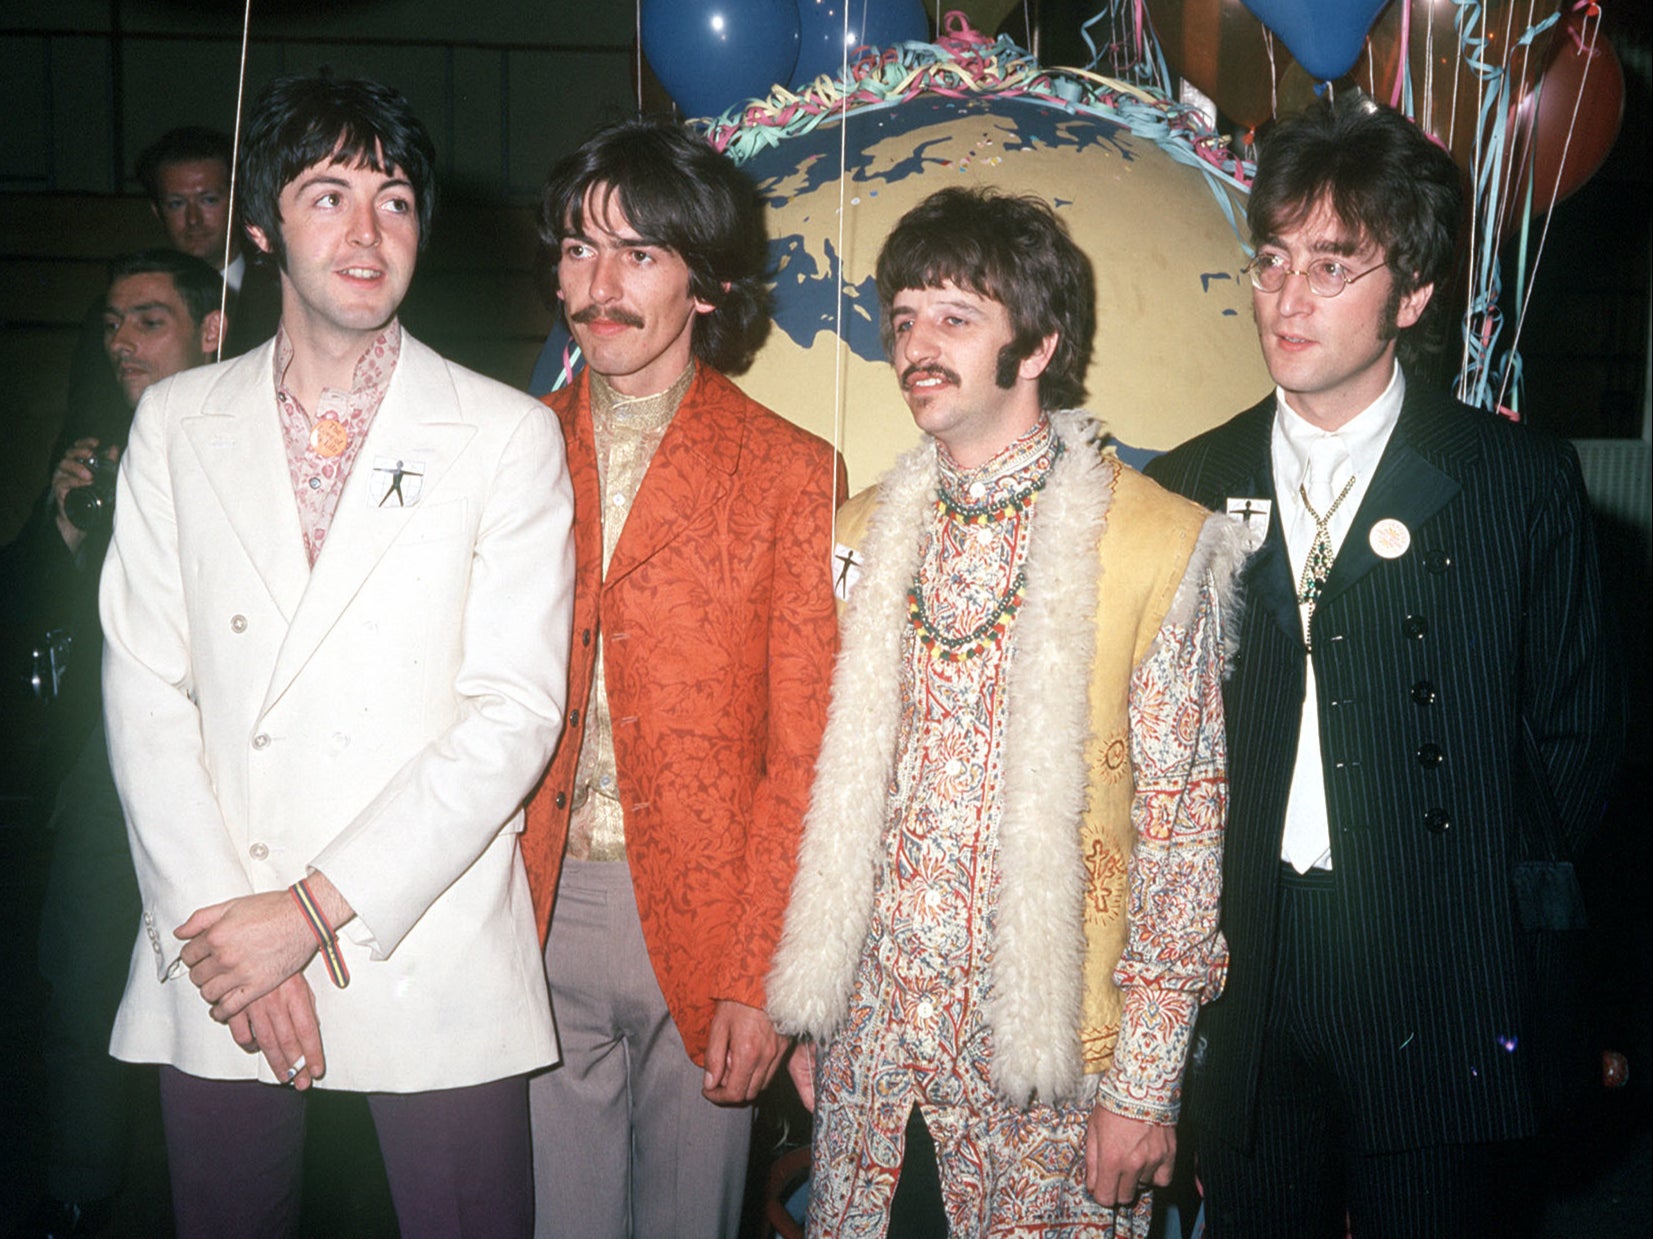 Is the back catalogue of The Beatles really as infinite as a recent series of releases and projects suggests?